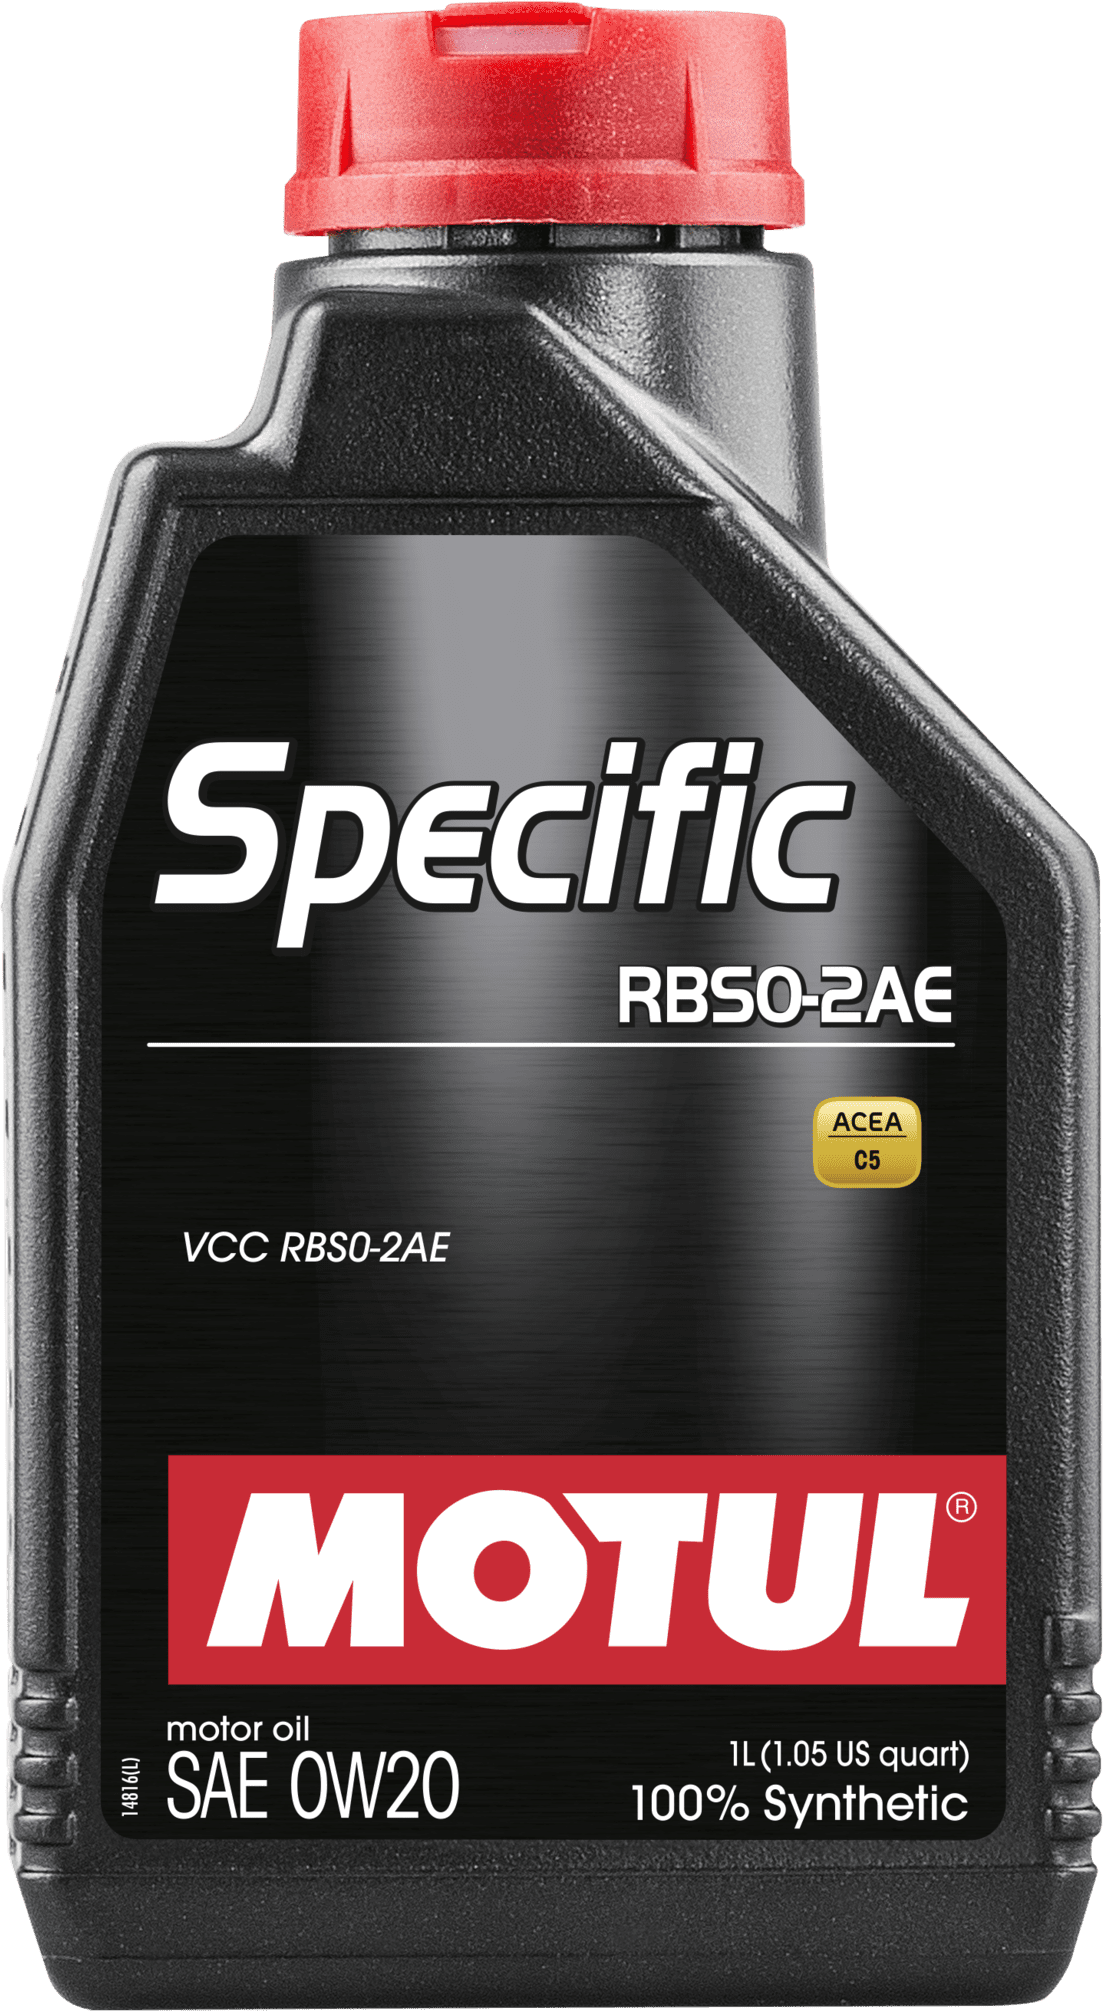 106044-1 100% Synthetic lubricant specially designed for VOLVO latest generation of diesel and gasoline engines requiring and approved RBS0-2AE engine oil.